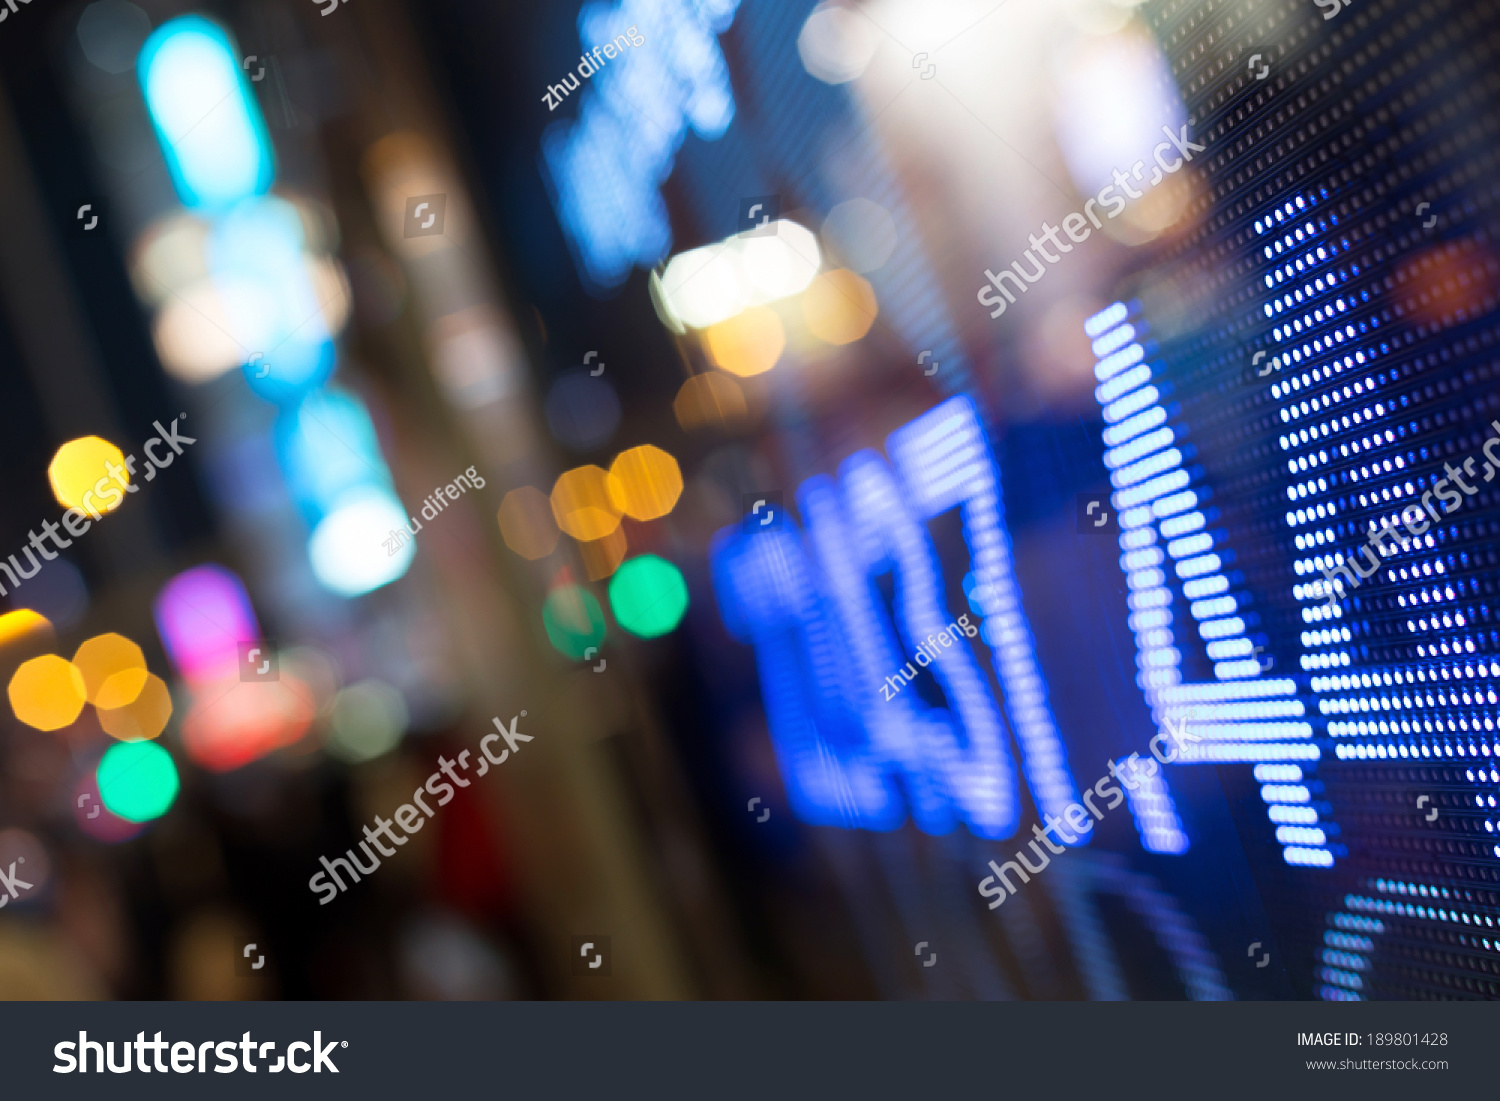 Display of Stock market quotes  #189801428